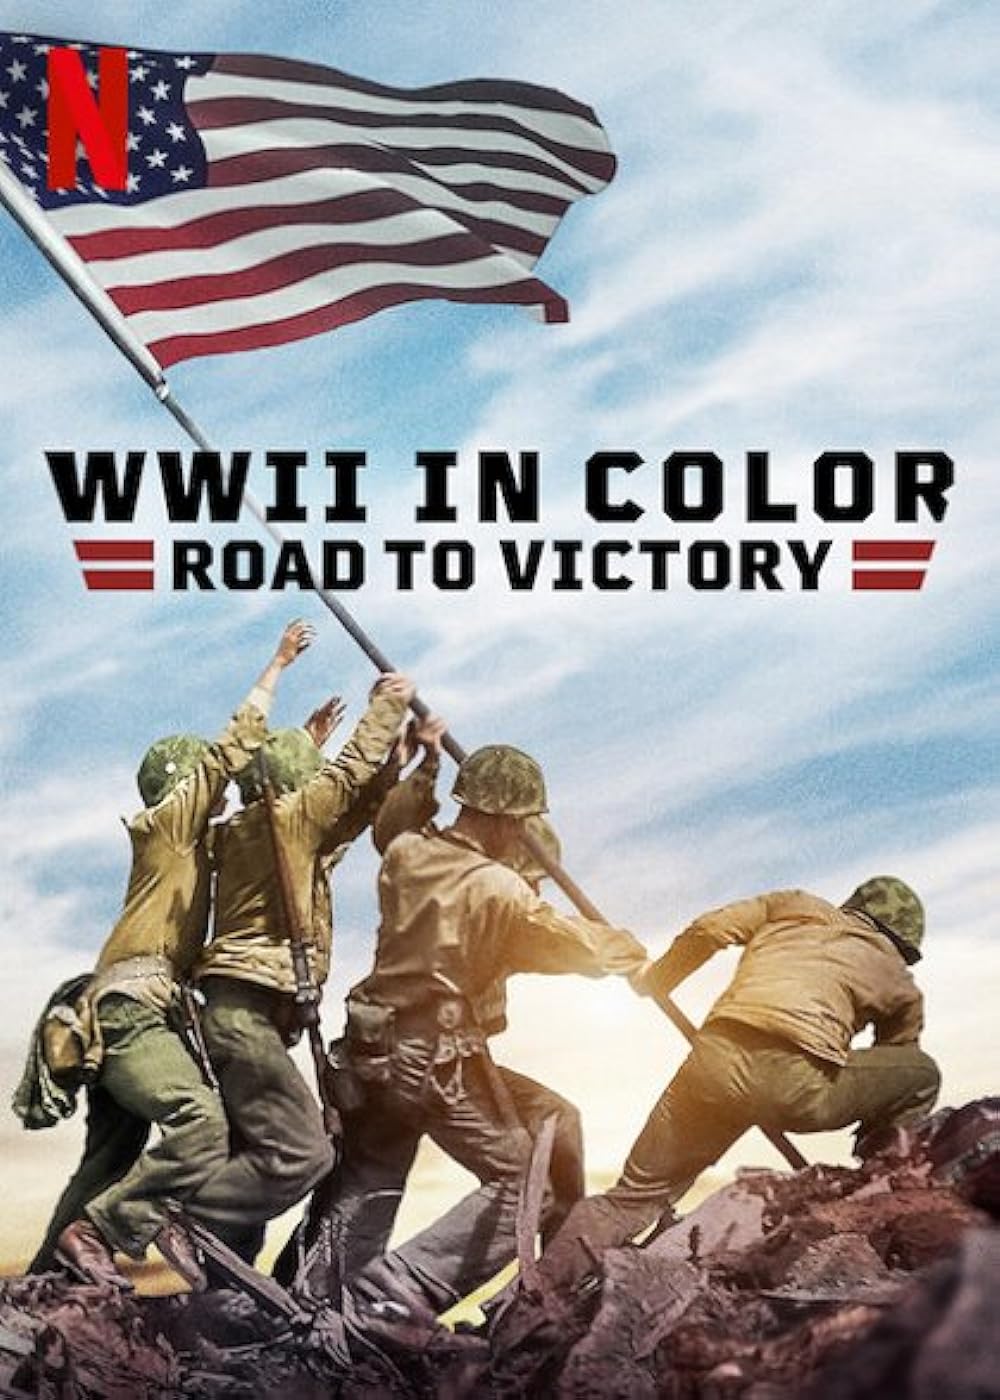 WWII in Color: Road to Victory (2021) S1 EP9 The Race for Berlin 128Kbps 25Fps 48Khz 2.0Ch DD+ NF E-AC3 Turkish Audio TAC